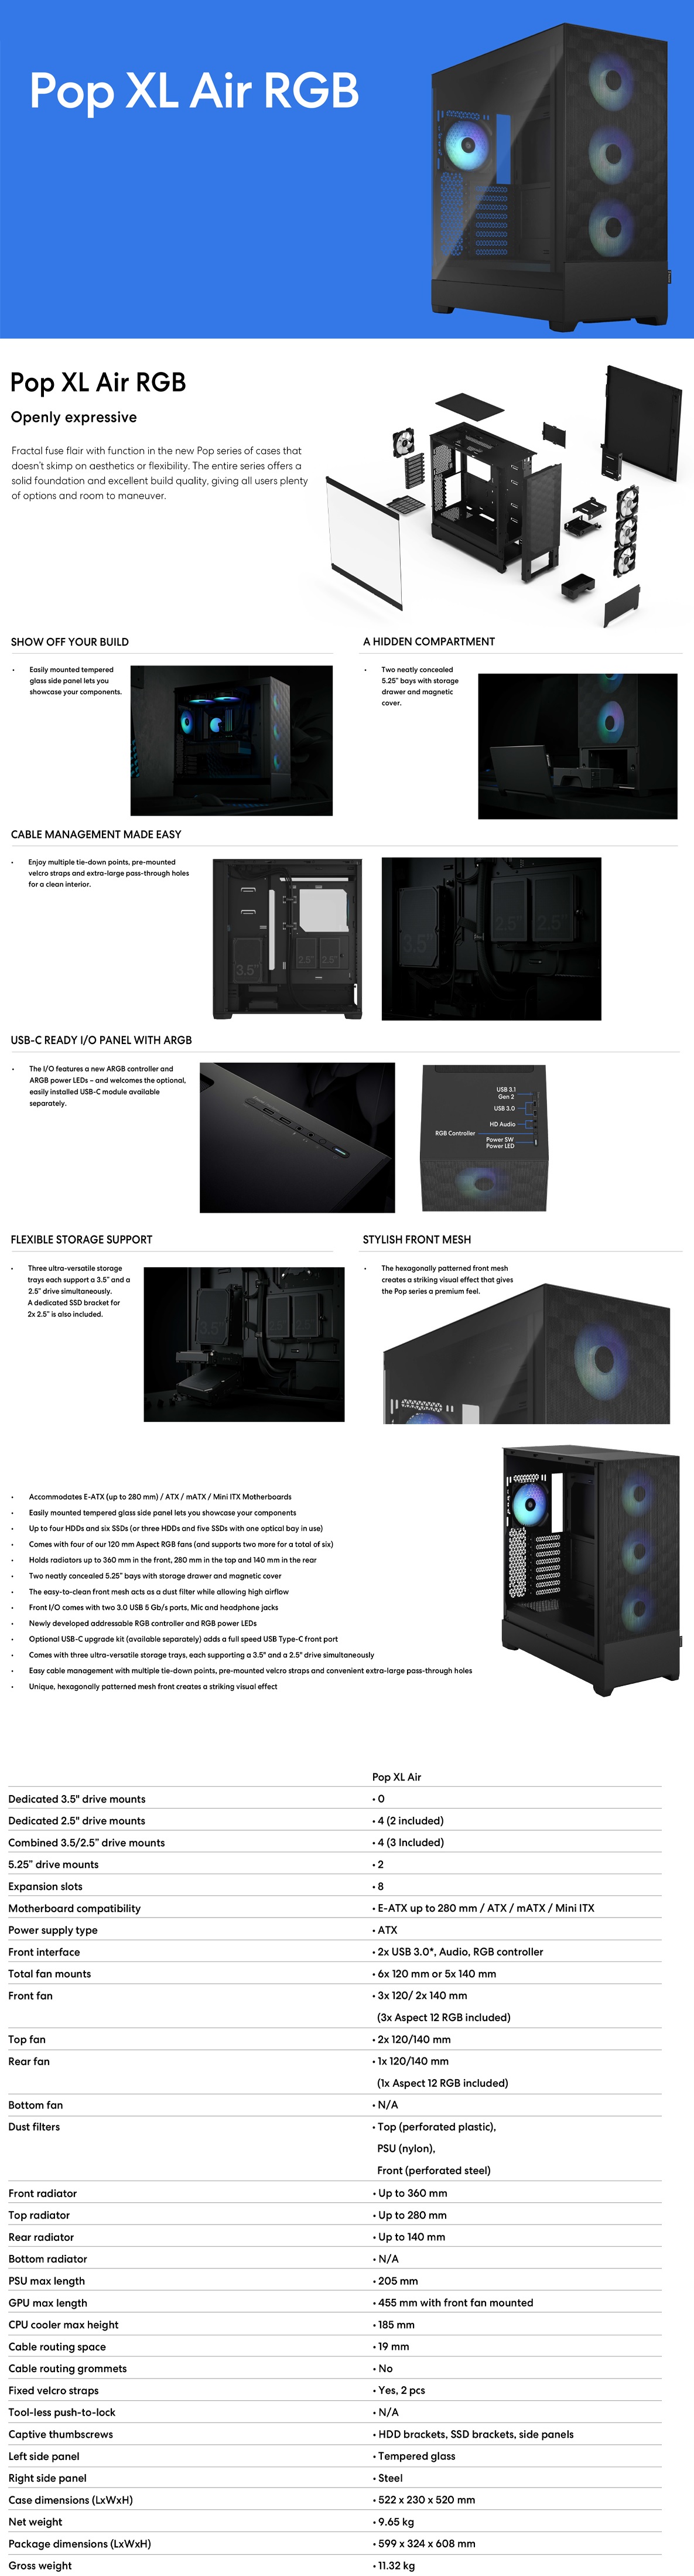 A large marketing image providing additional information about the product Fractal Design Pop XL Air RGB TG Clear Tint Full Tower Case - Black - Additional alt info not provided